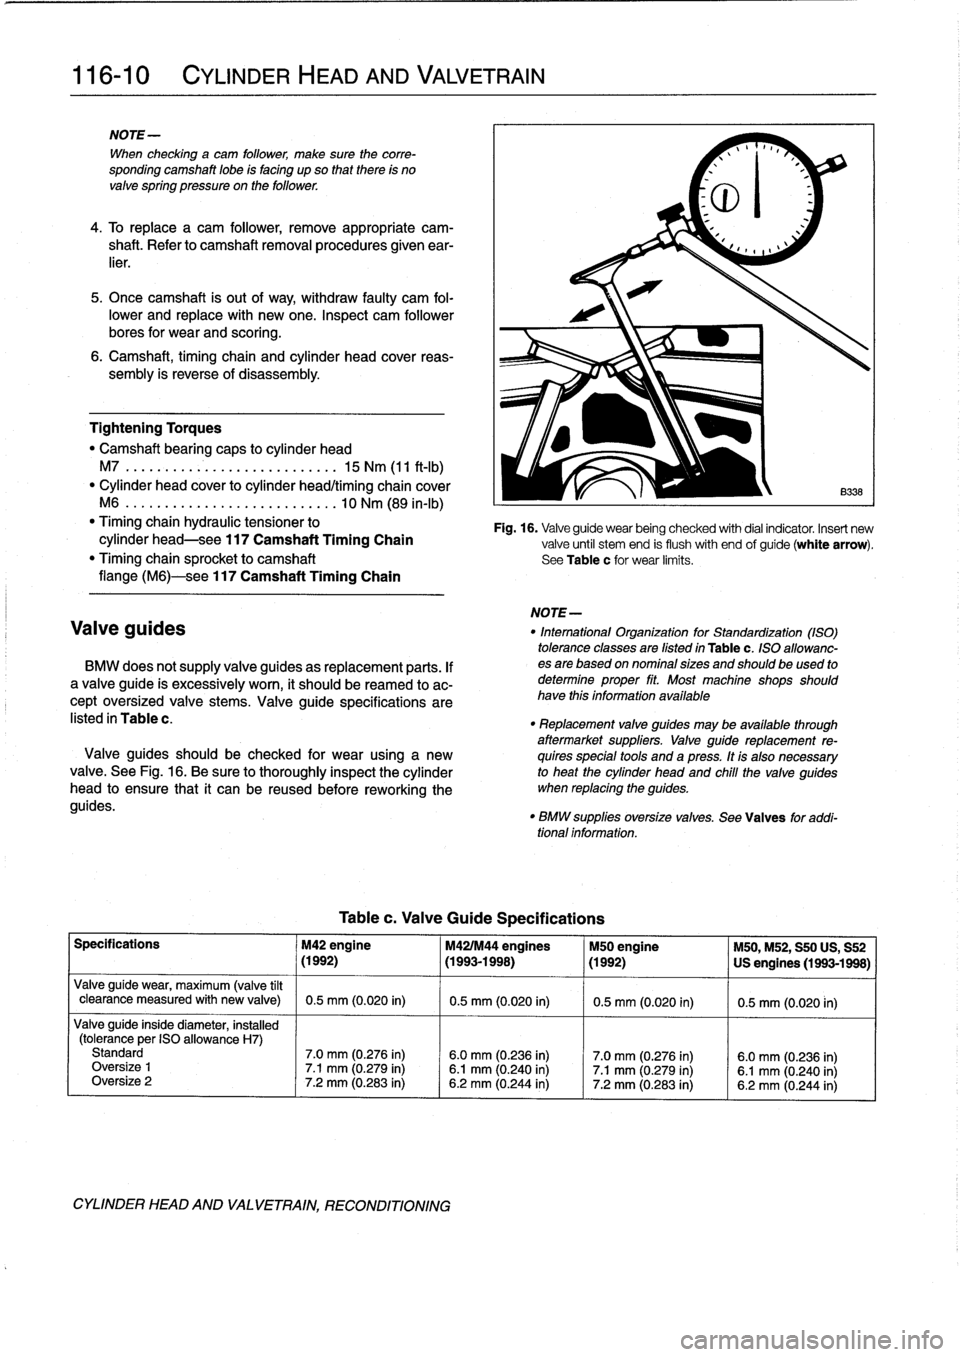 BMW 325i 1992 E36 Owners Manual 
116-
1
0

	

CYLINDER
HEADAND
VALVETRAIN

NOTE-

When
checking
a
cam
follower,
make
sure
the
corre-
sponding
camshaft
lobe
ís
facing
up
so
that
there
is
no
valve
spring
pressure
on
the
follower
.

4